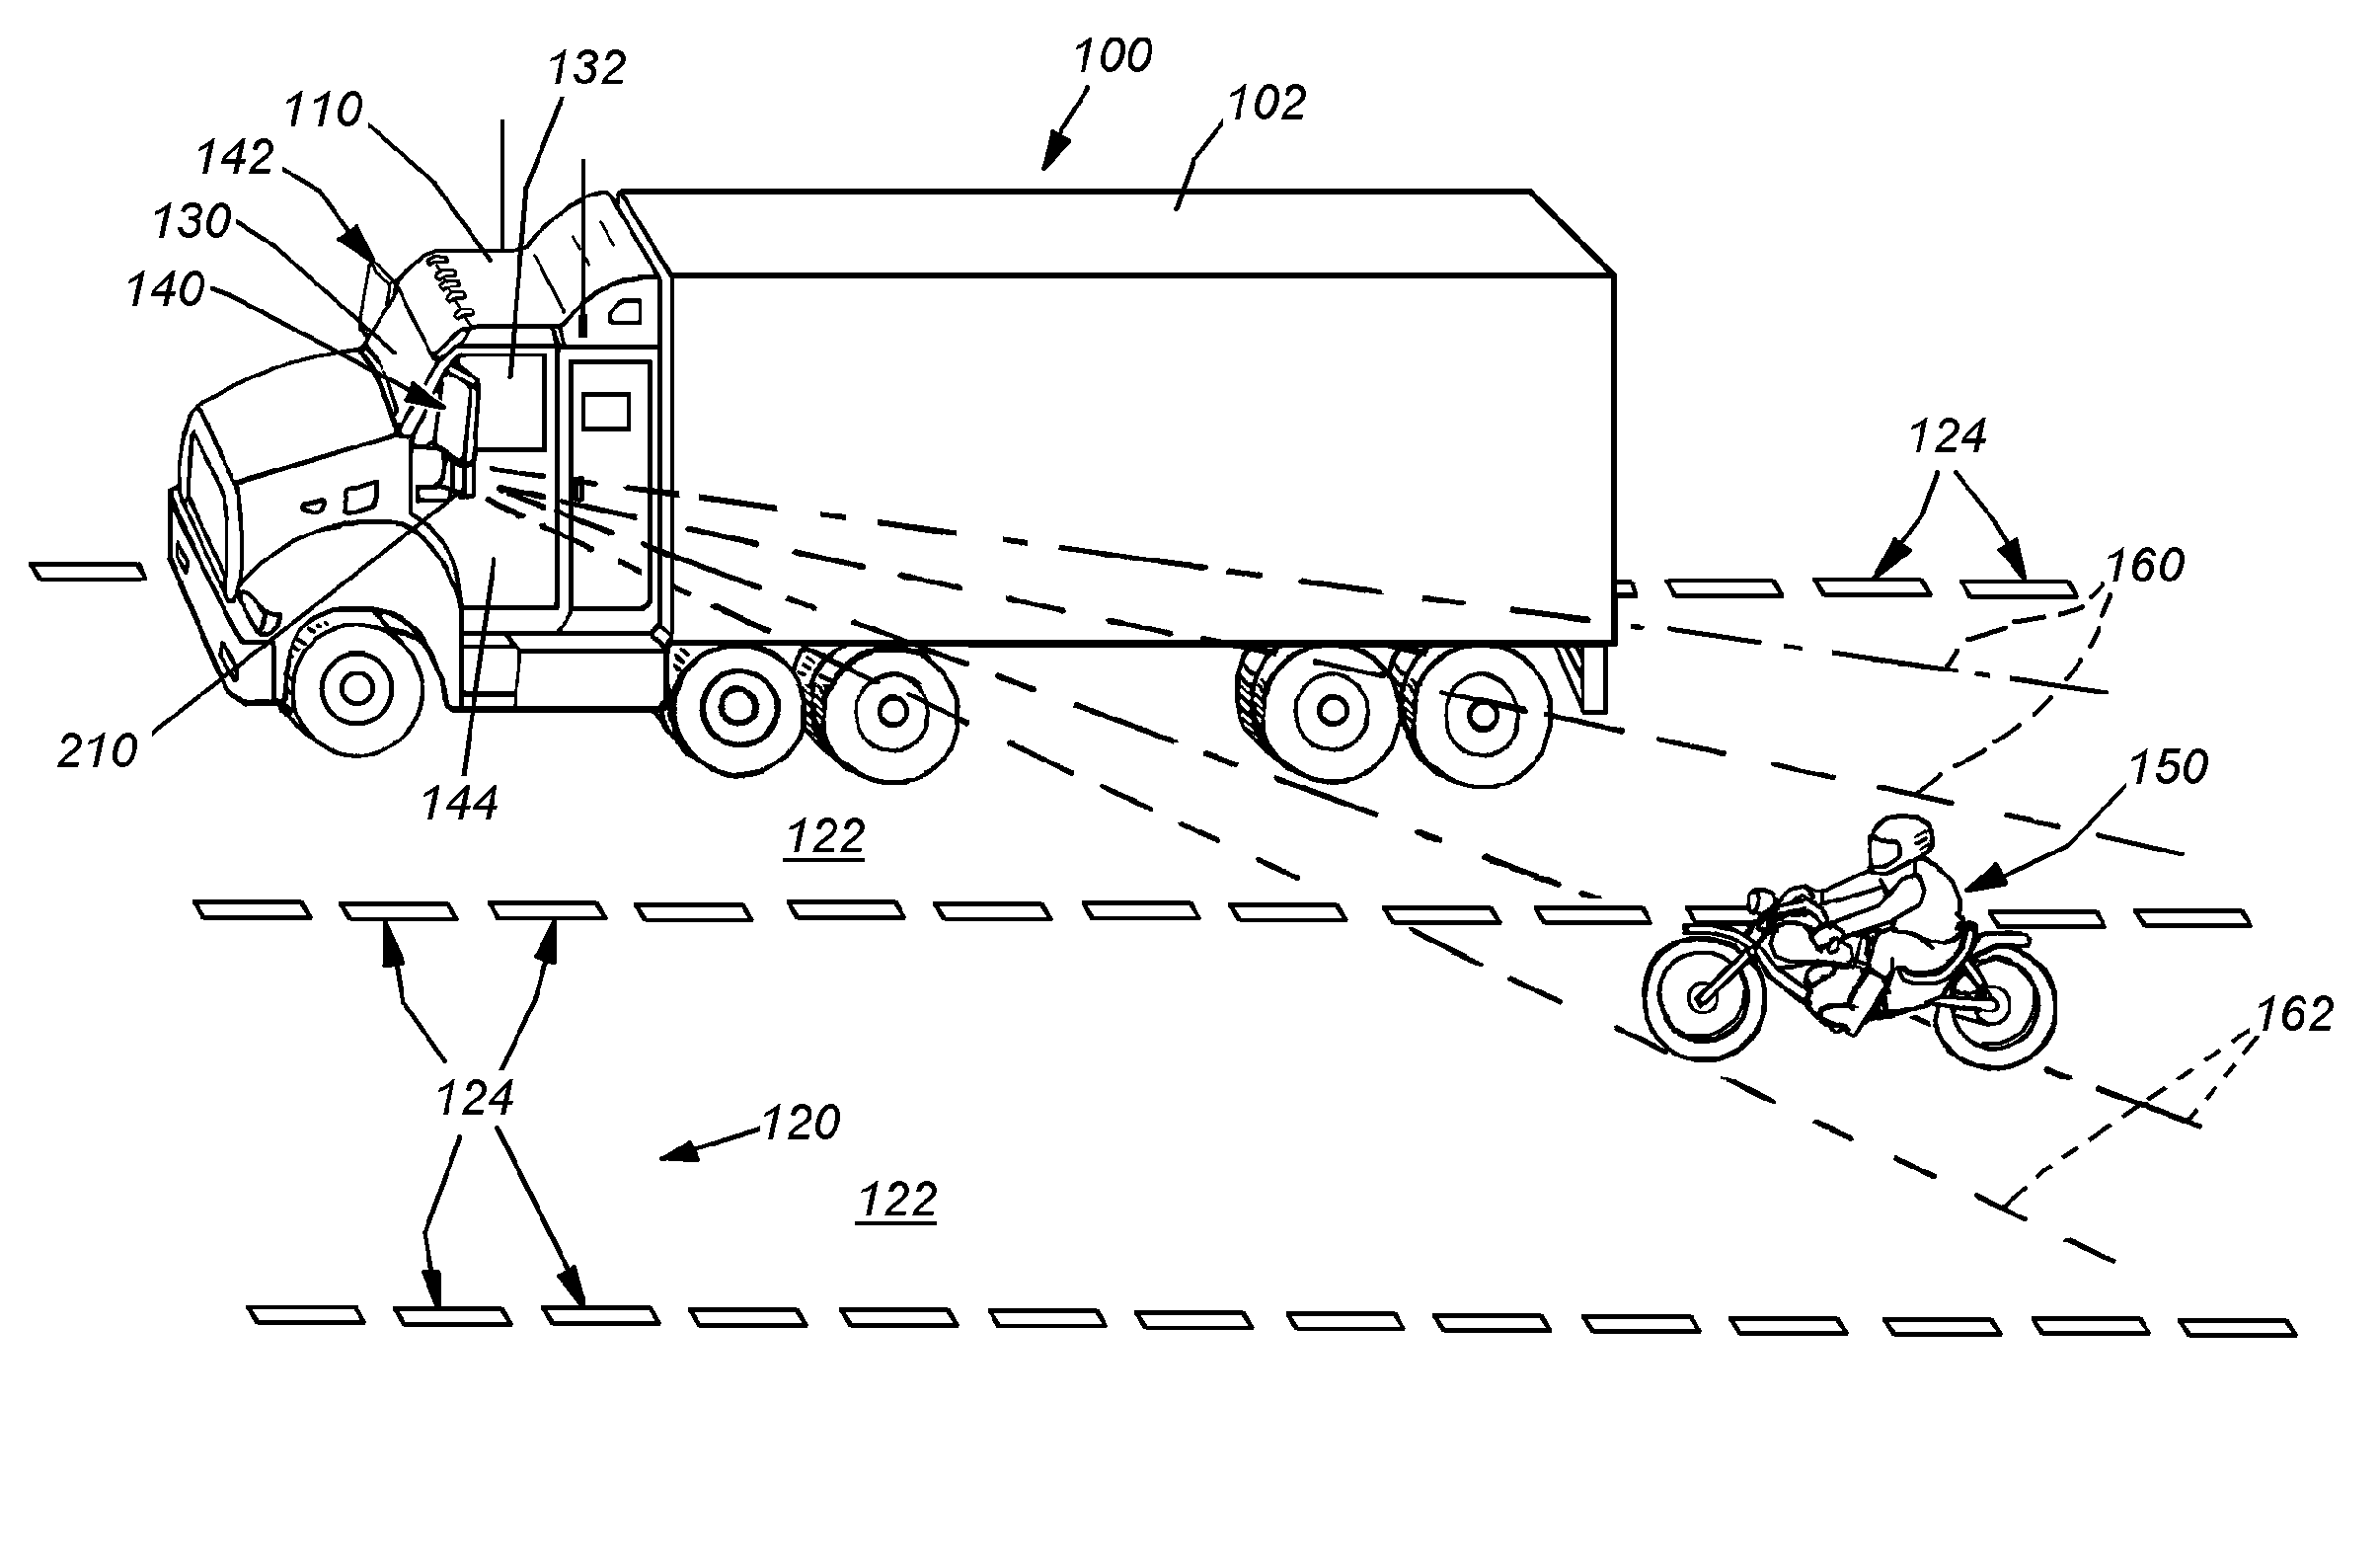 System and method for side vision detection of obstacles for vehicles